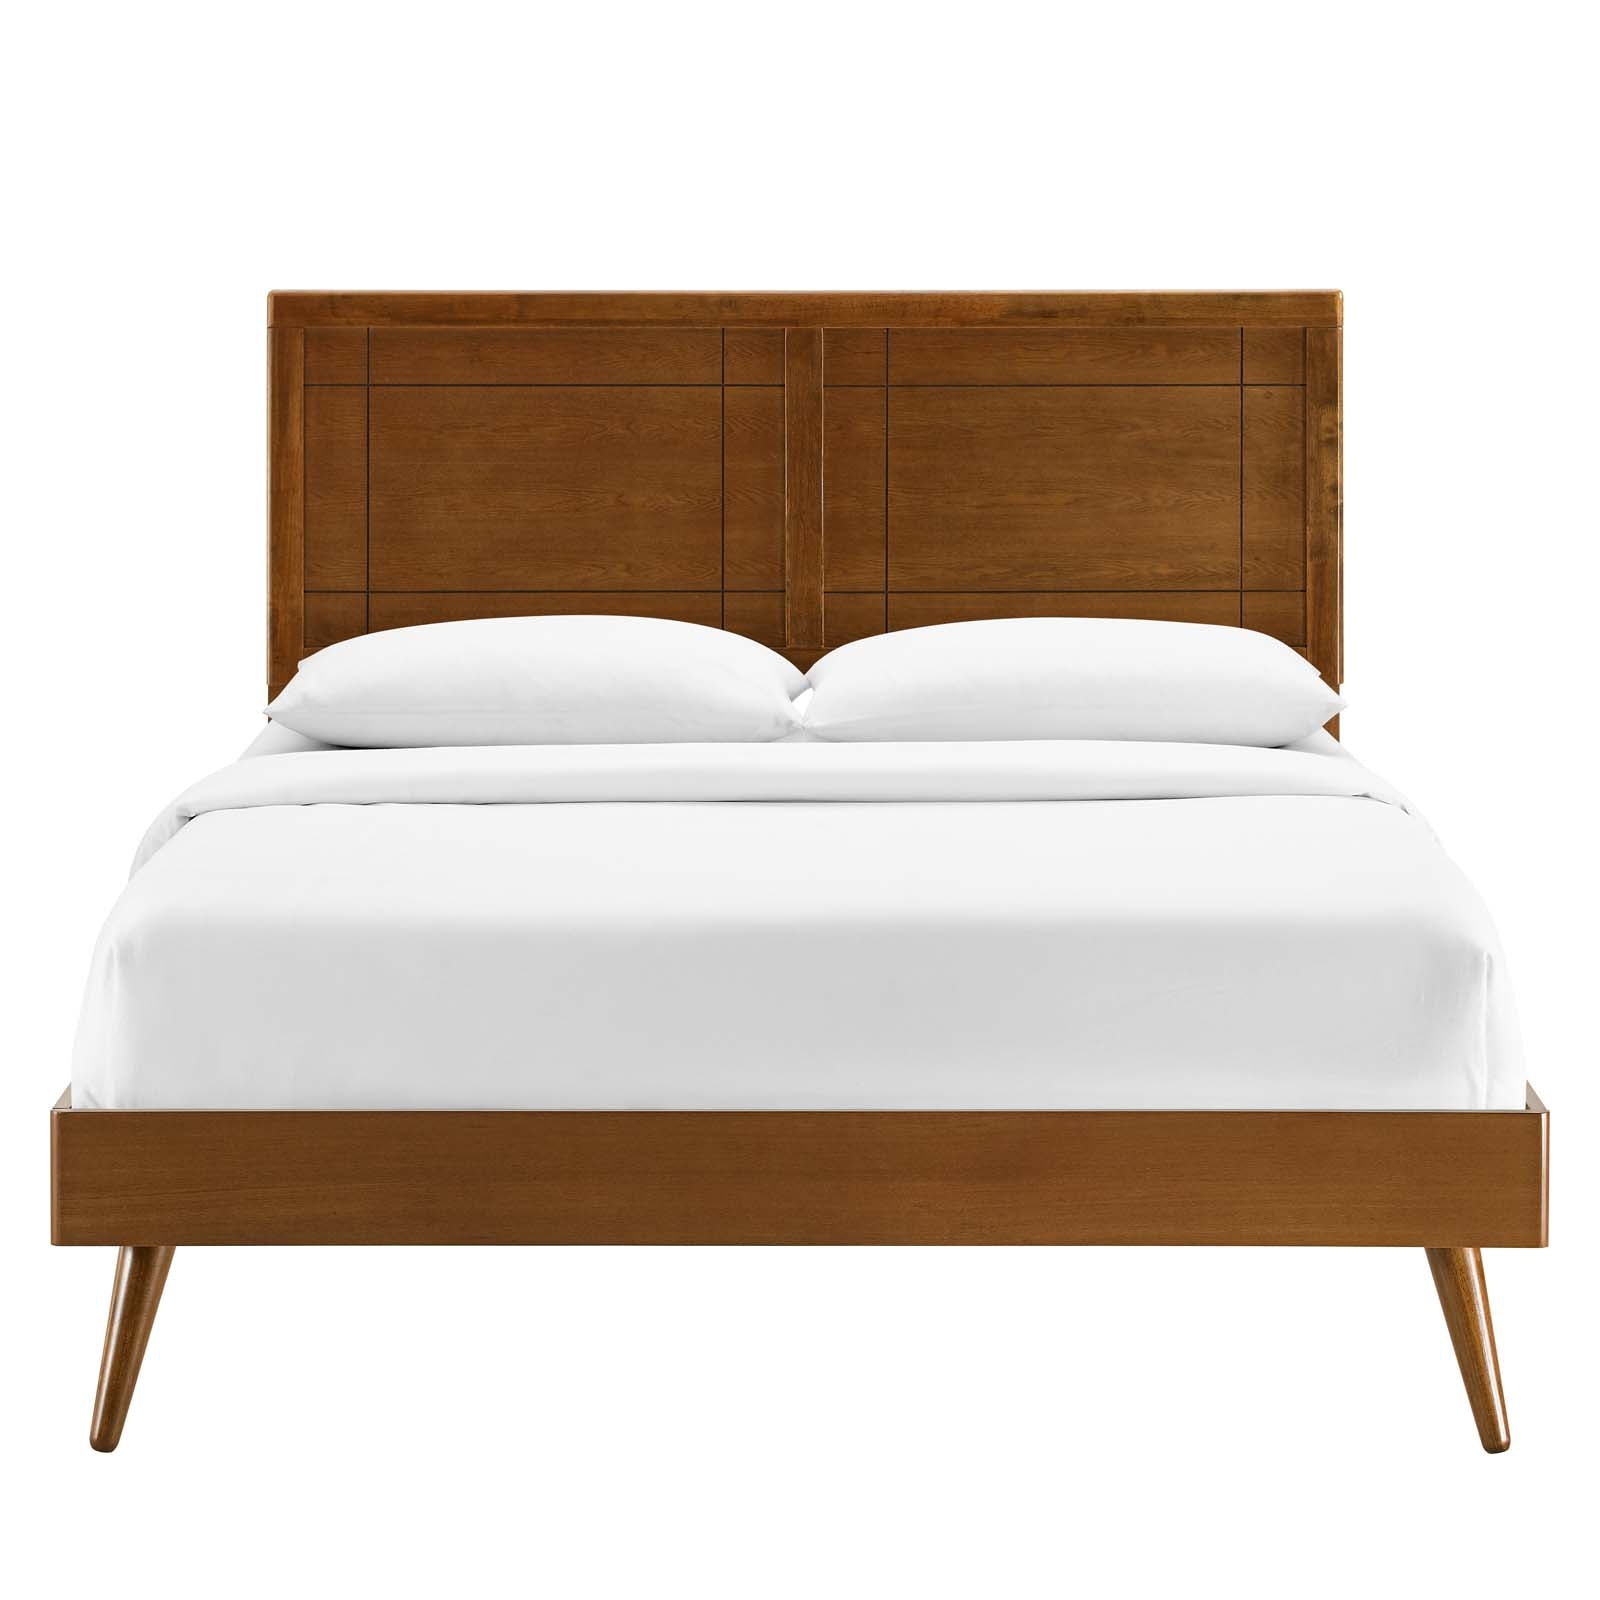 Modway Beds - Marlee Full Wood Platform Bed With Splayed Legs Walnut